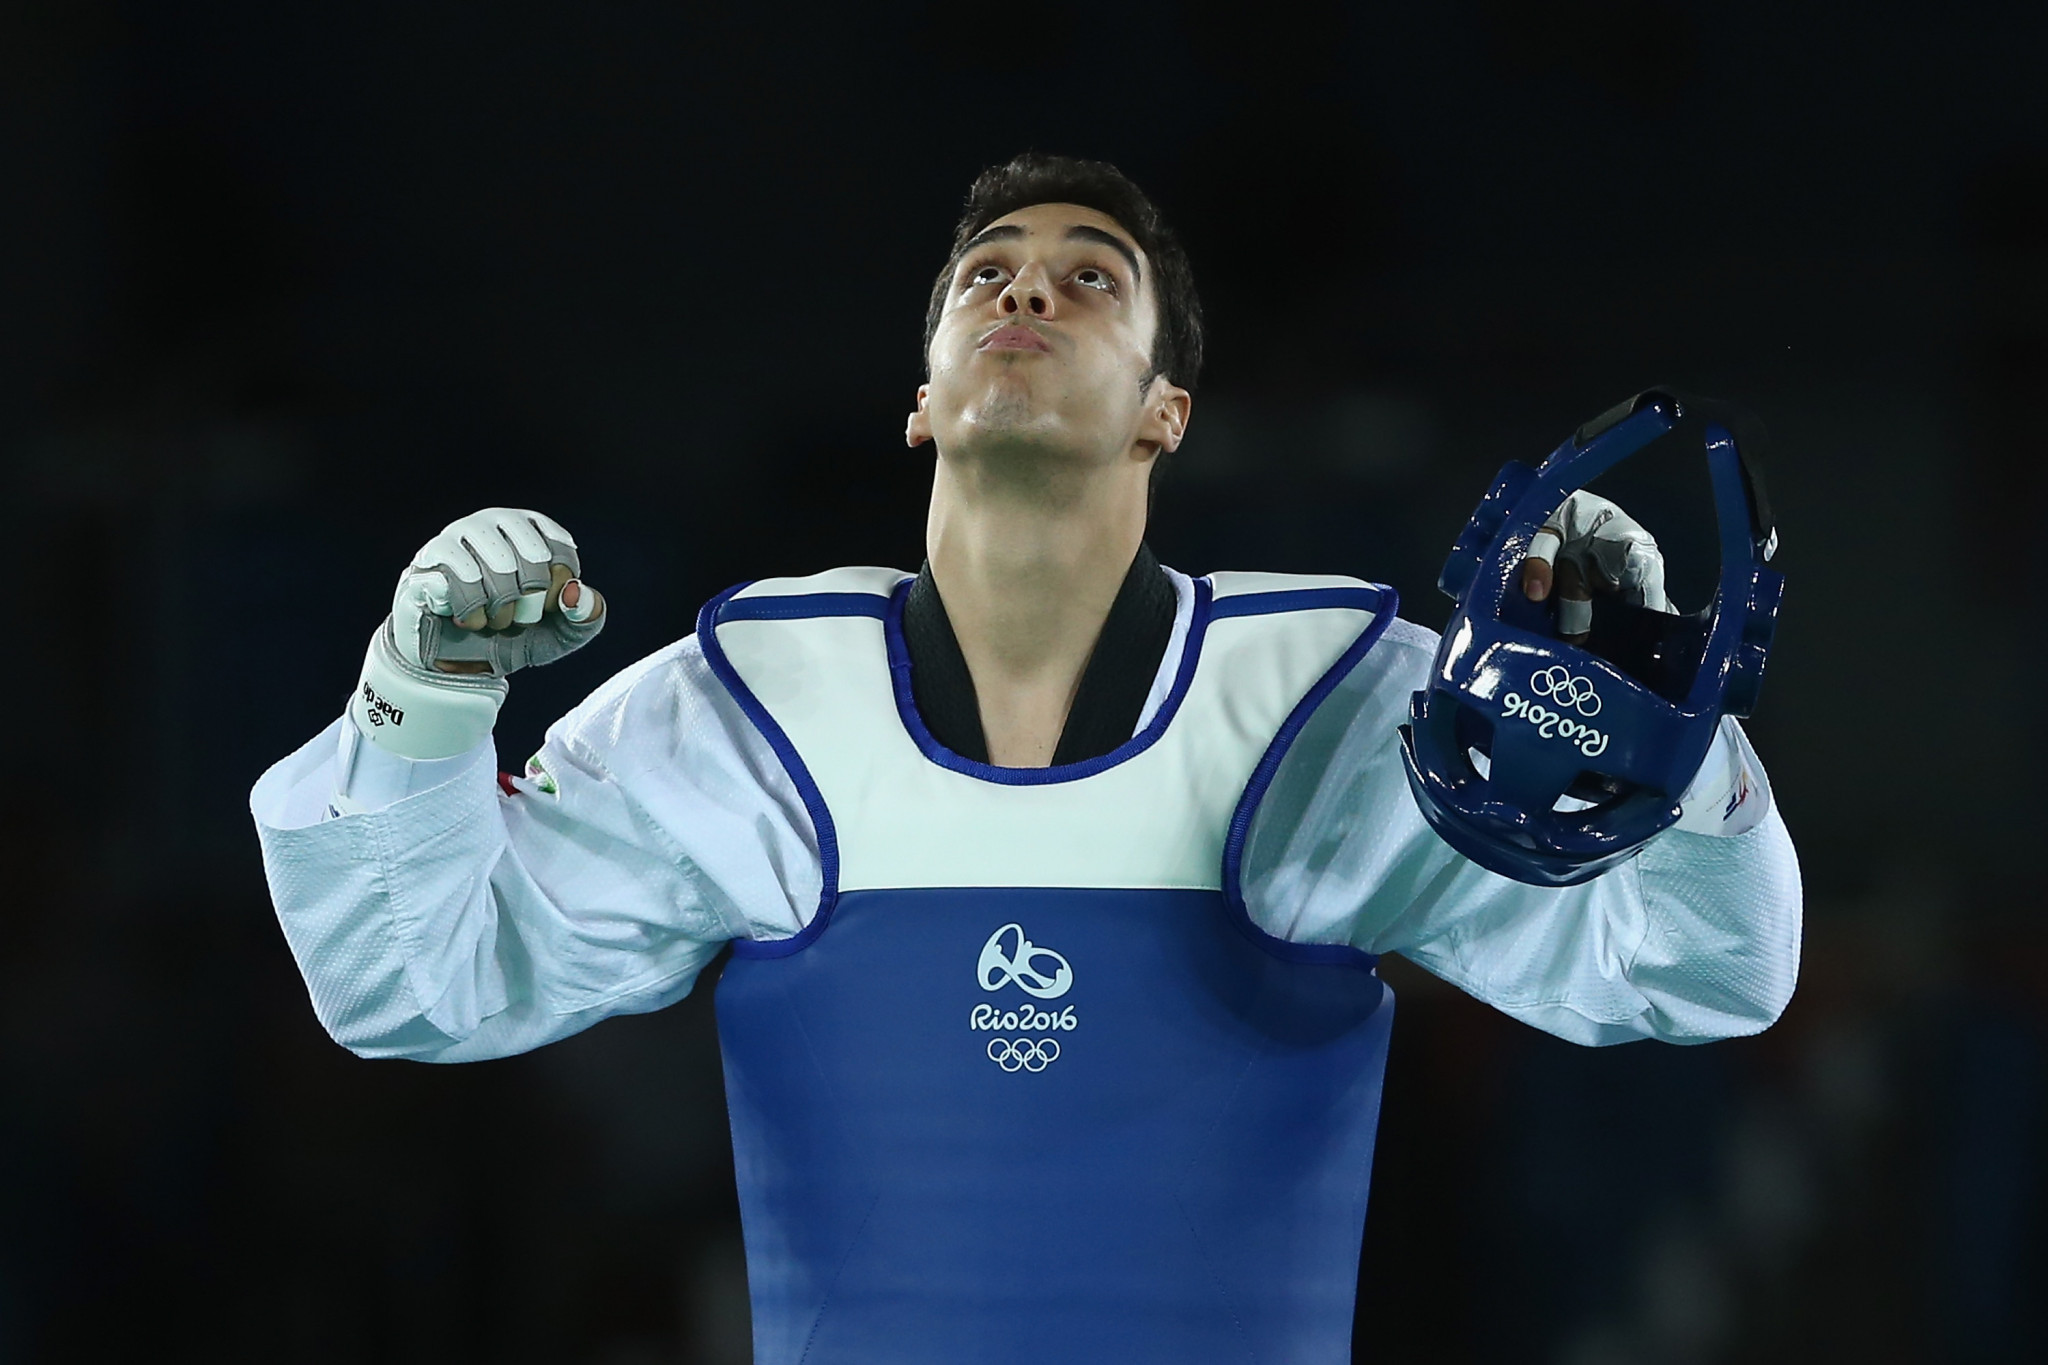 Mahdi Khodabakhshi is another former Asian Games and world champion in the squad ©Getty Images